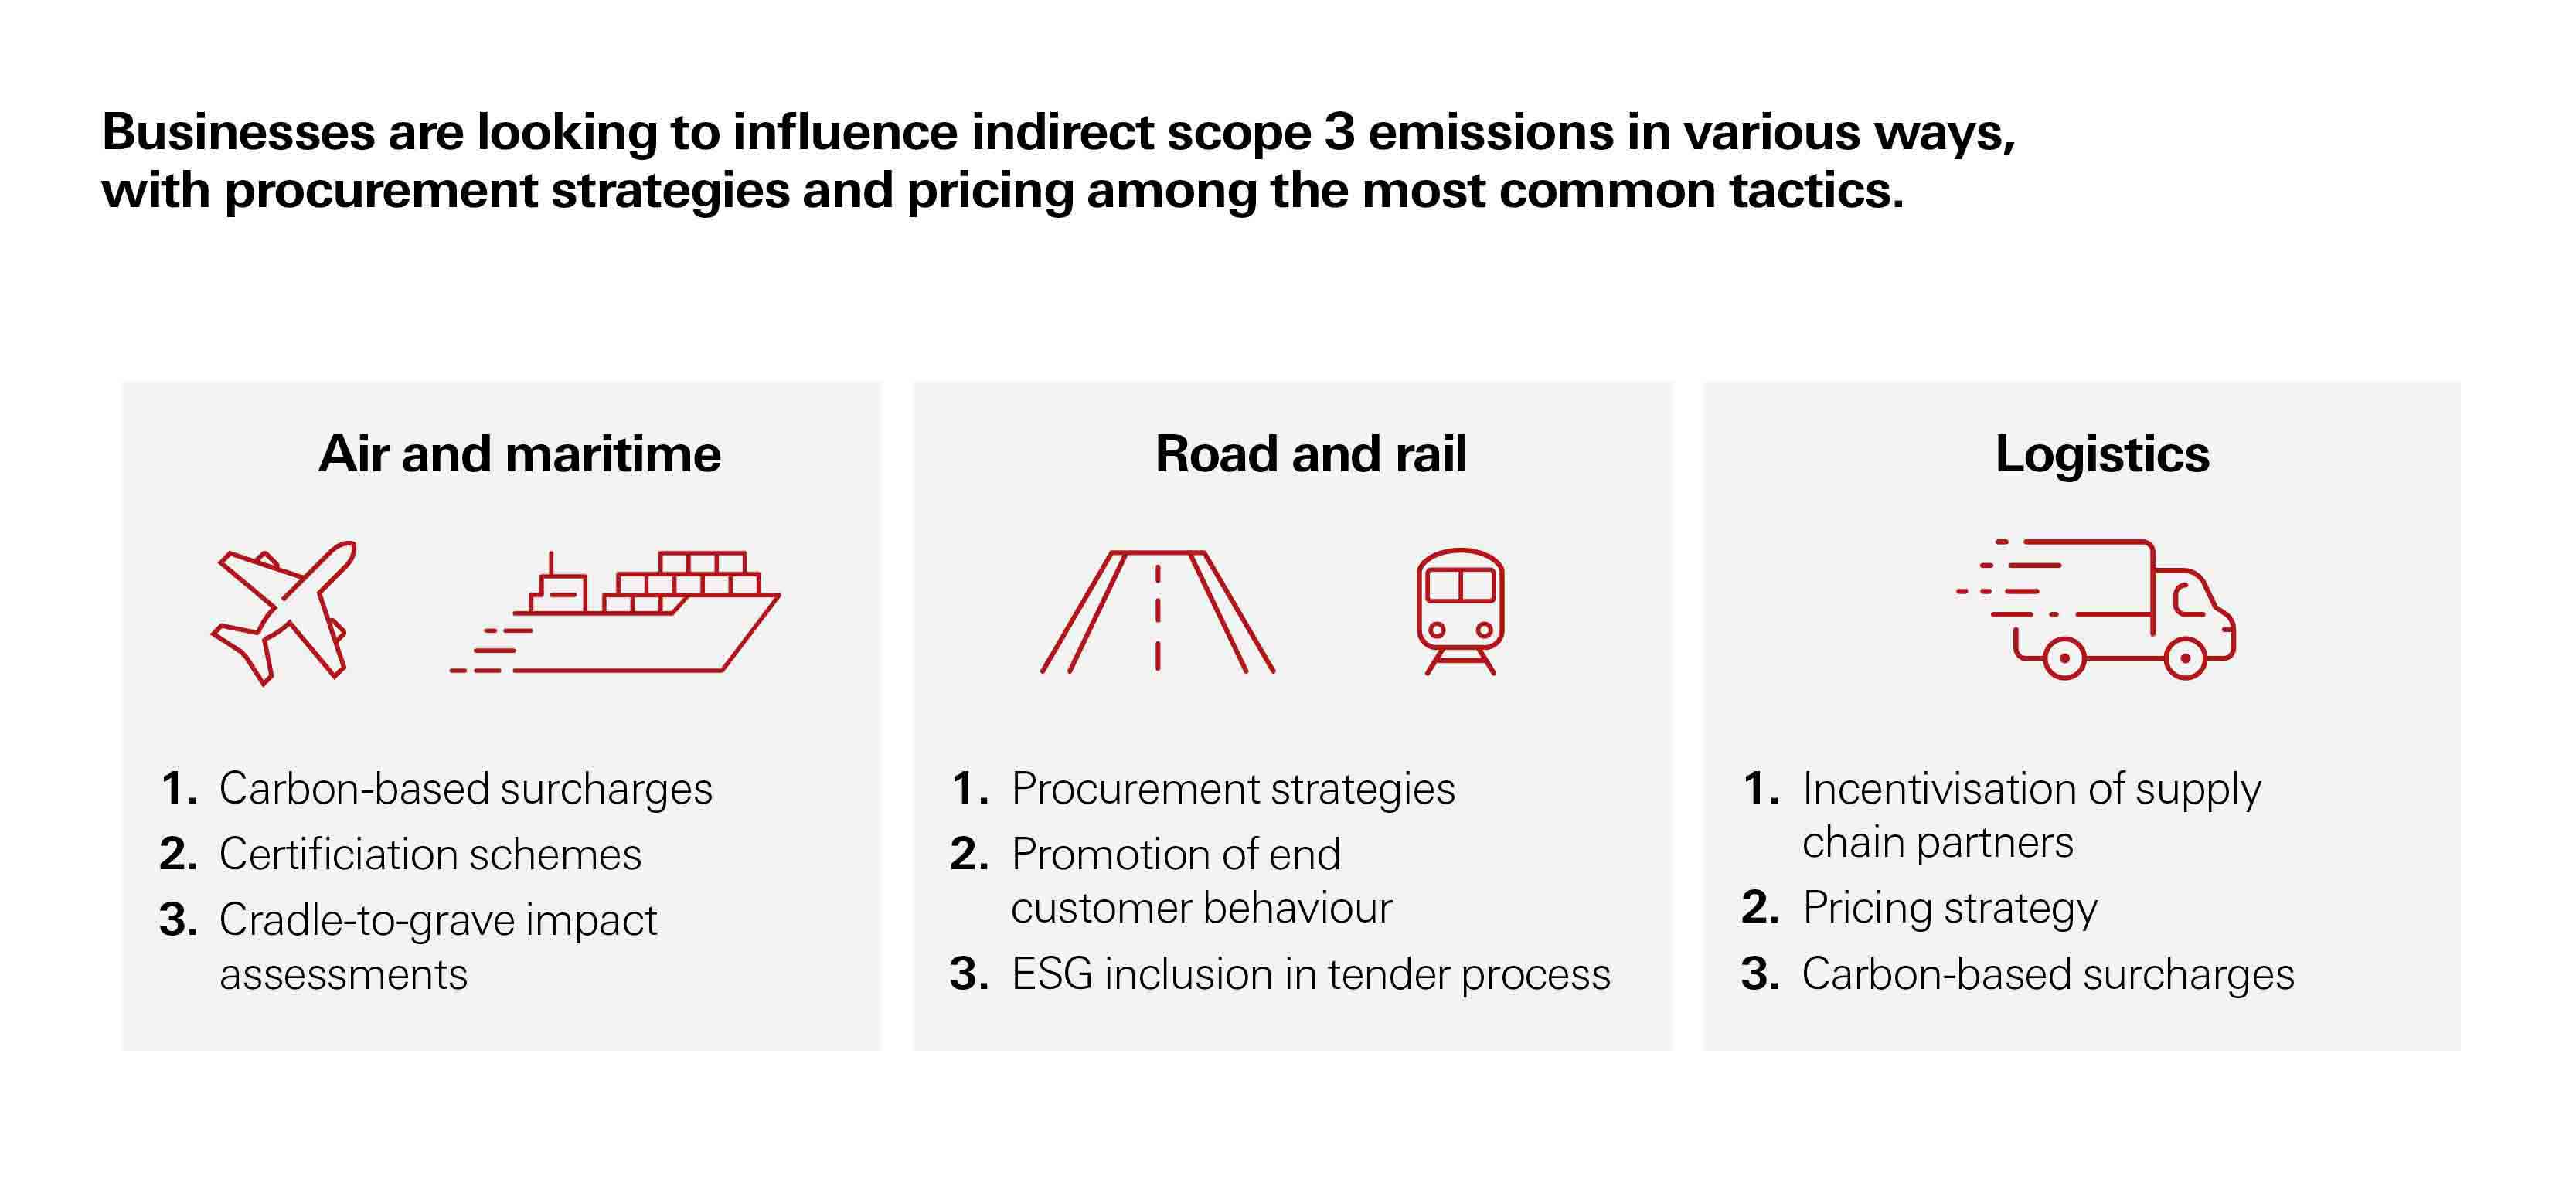  Businesses are looking to influence indirect scope 3 emissions in various ways.